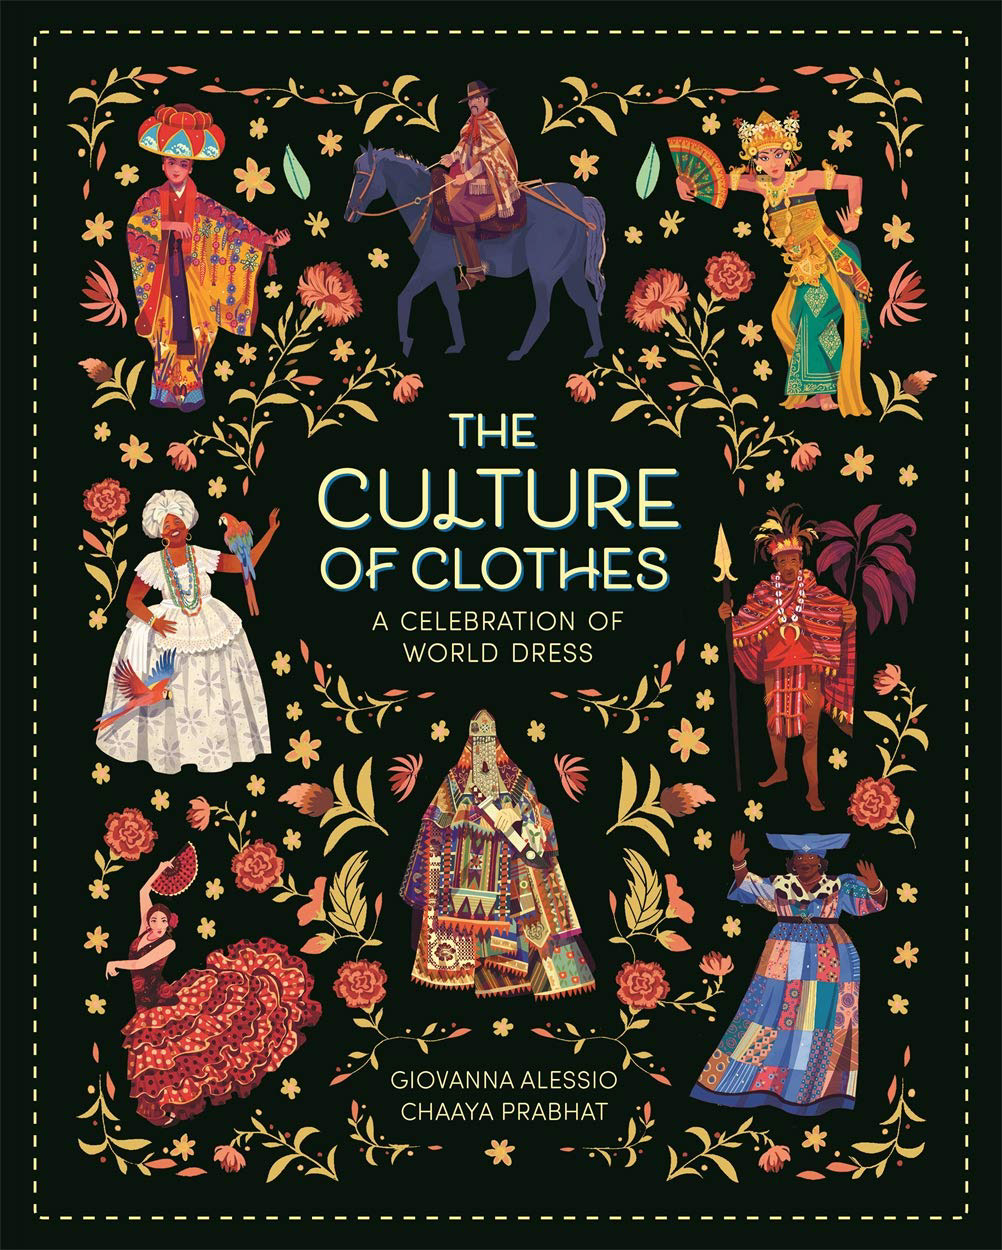 Chaaya Prabhat's Portfolio - The Culture Of Clothes (Picture Book)